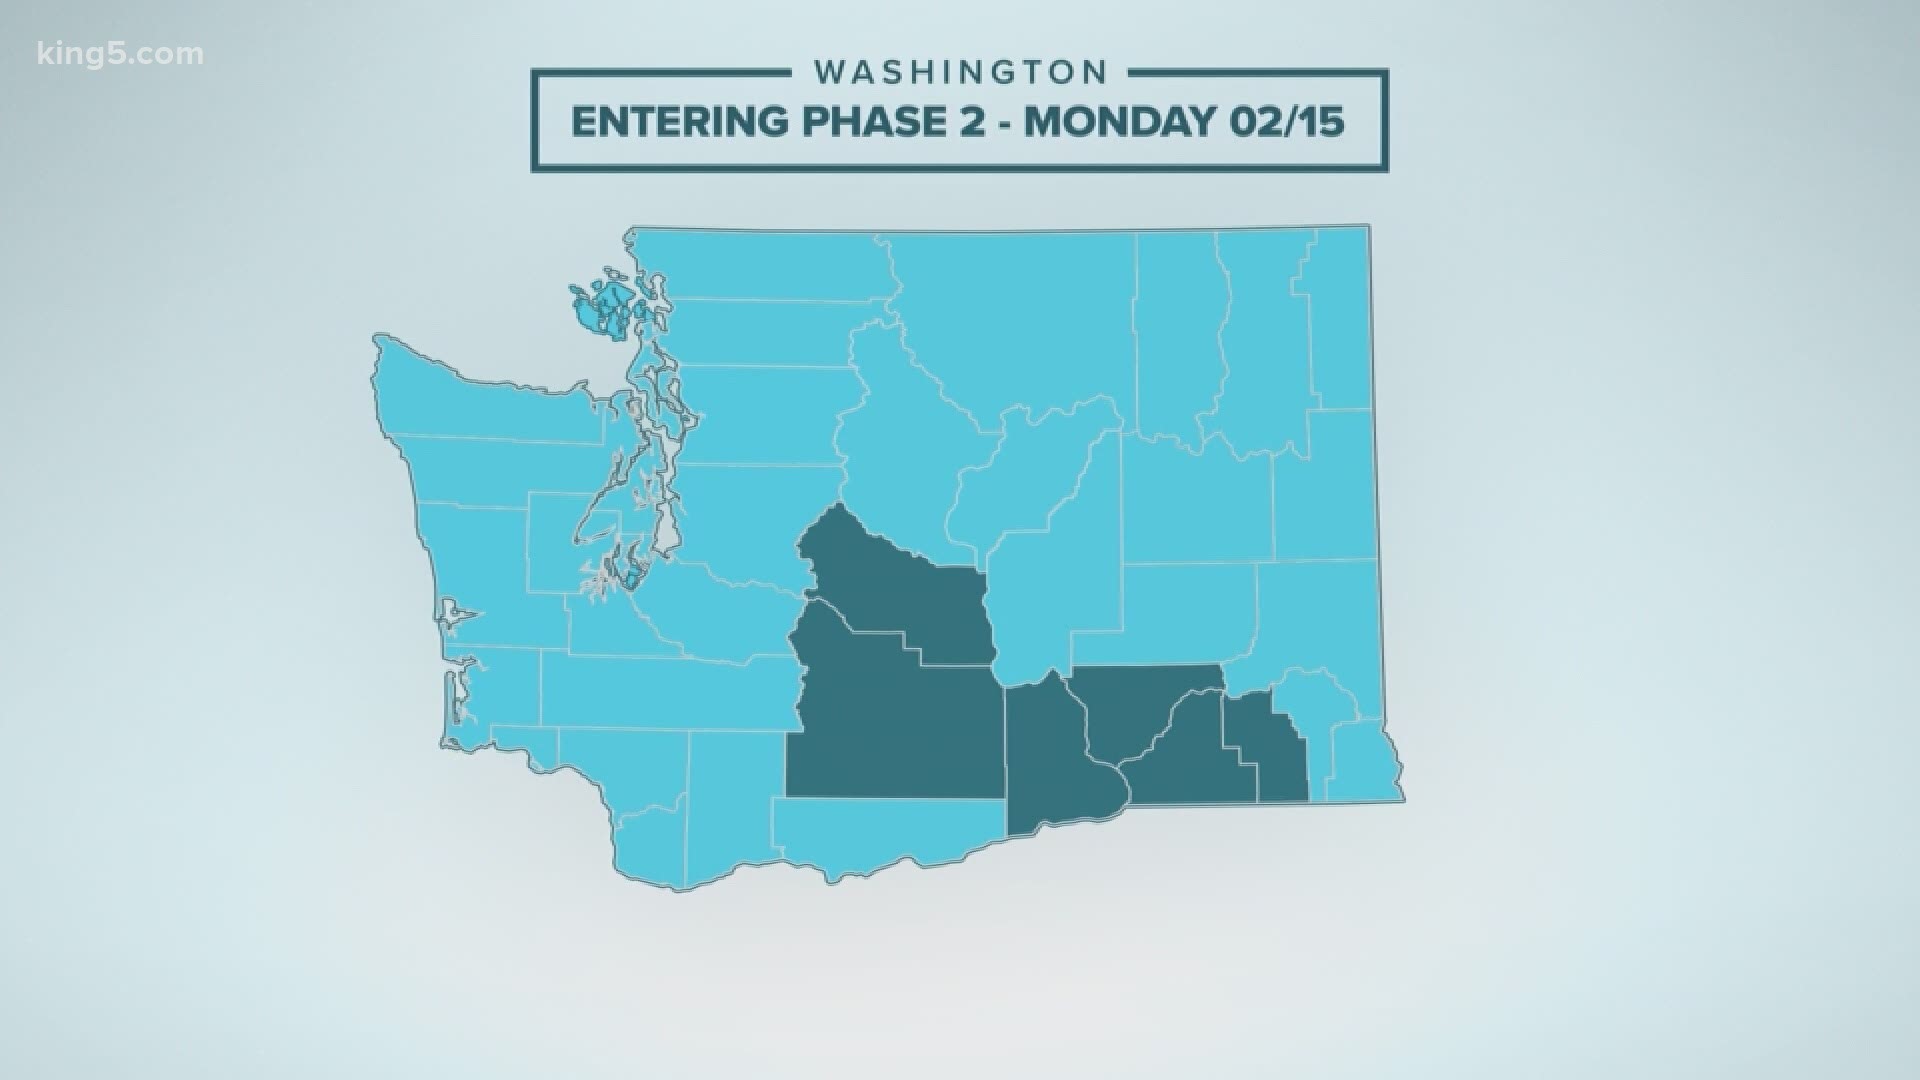 All of Washington state, except counties in the South Central region, will be in Phase 2 of reopening, effective Sunday, Feb. 14.